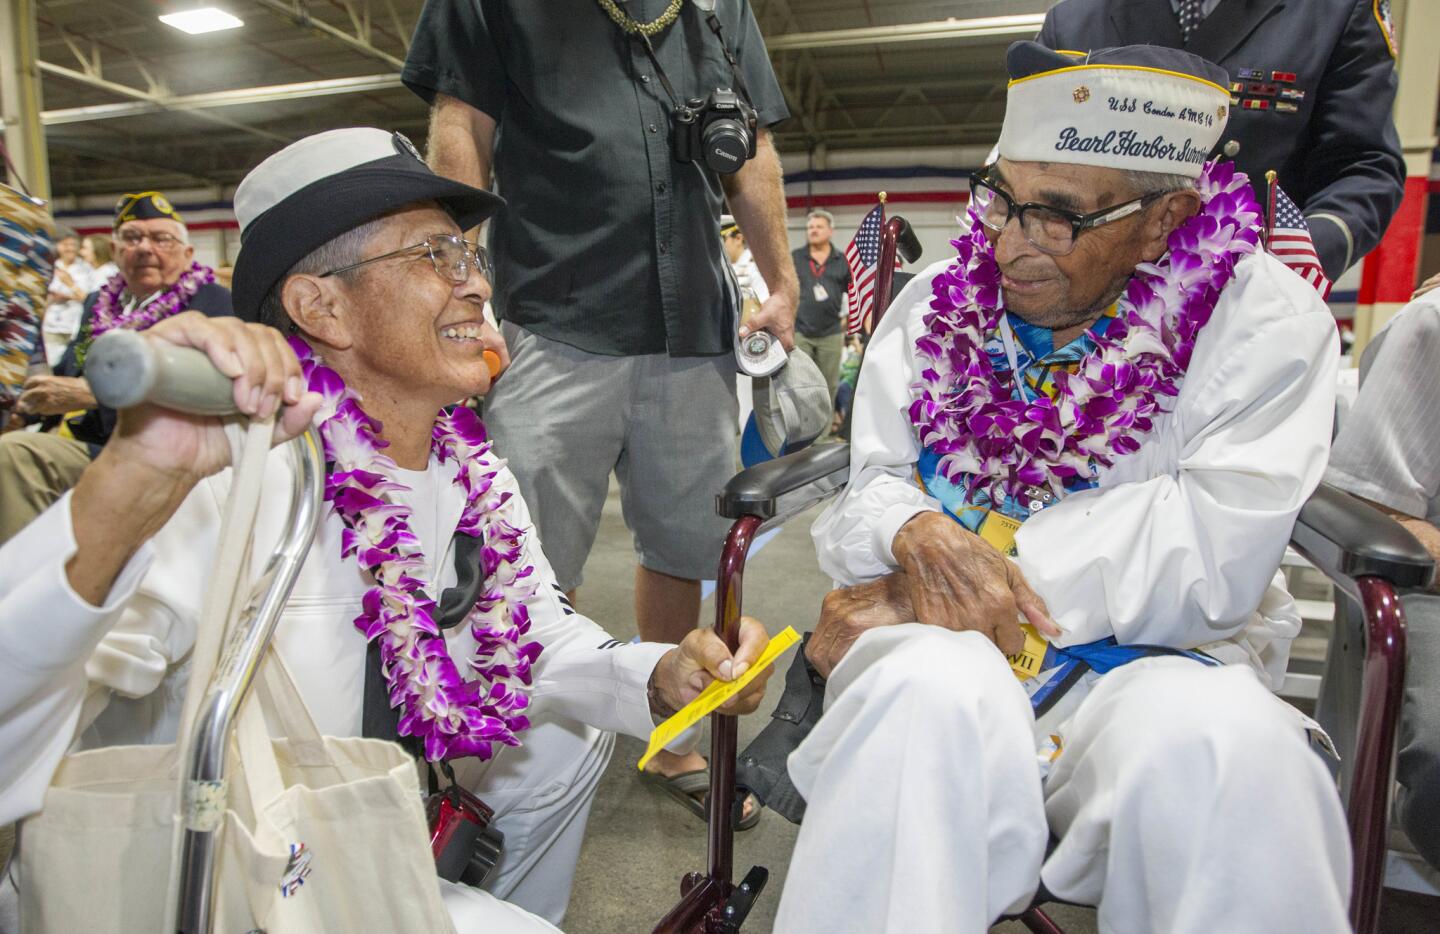 Kathleen Chavez, left, talks with her father Ray Chavez, right, age 104, of the USS Condor the oldest living survivor from the Pearl Harbor attacks along with the remaining living survivors of the USS Arizona gathered at the World War II Valor in the Pacific National Monument at Joint Base Pearl Harbor-Hickam, Wednesday, Dec.7, 2016, in Honolulu.